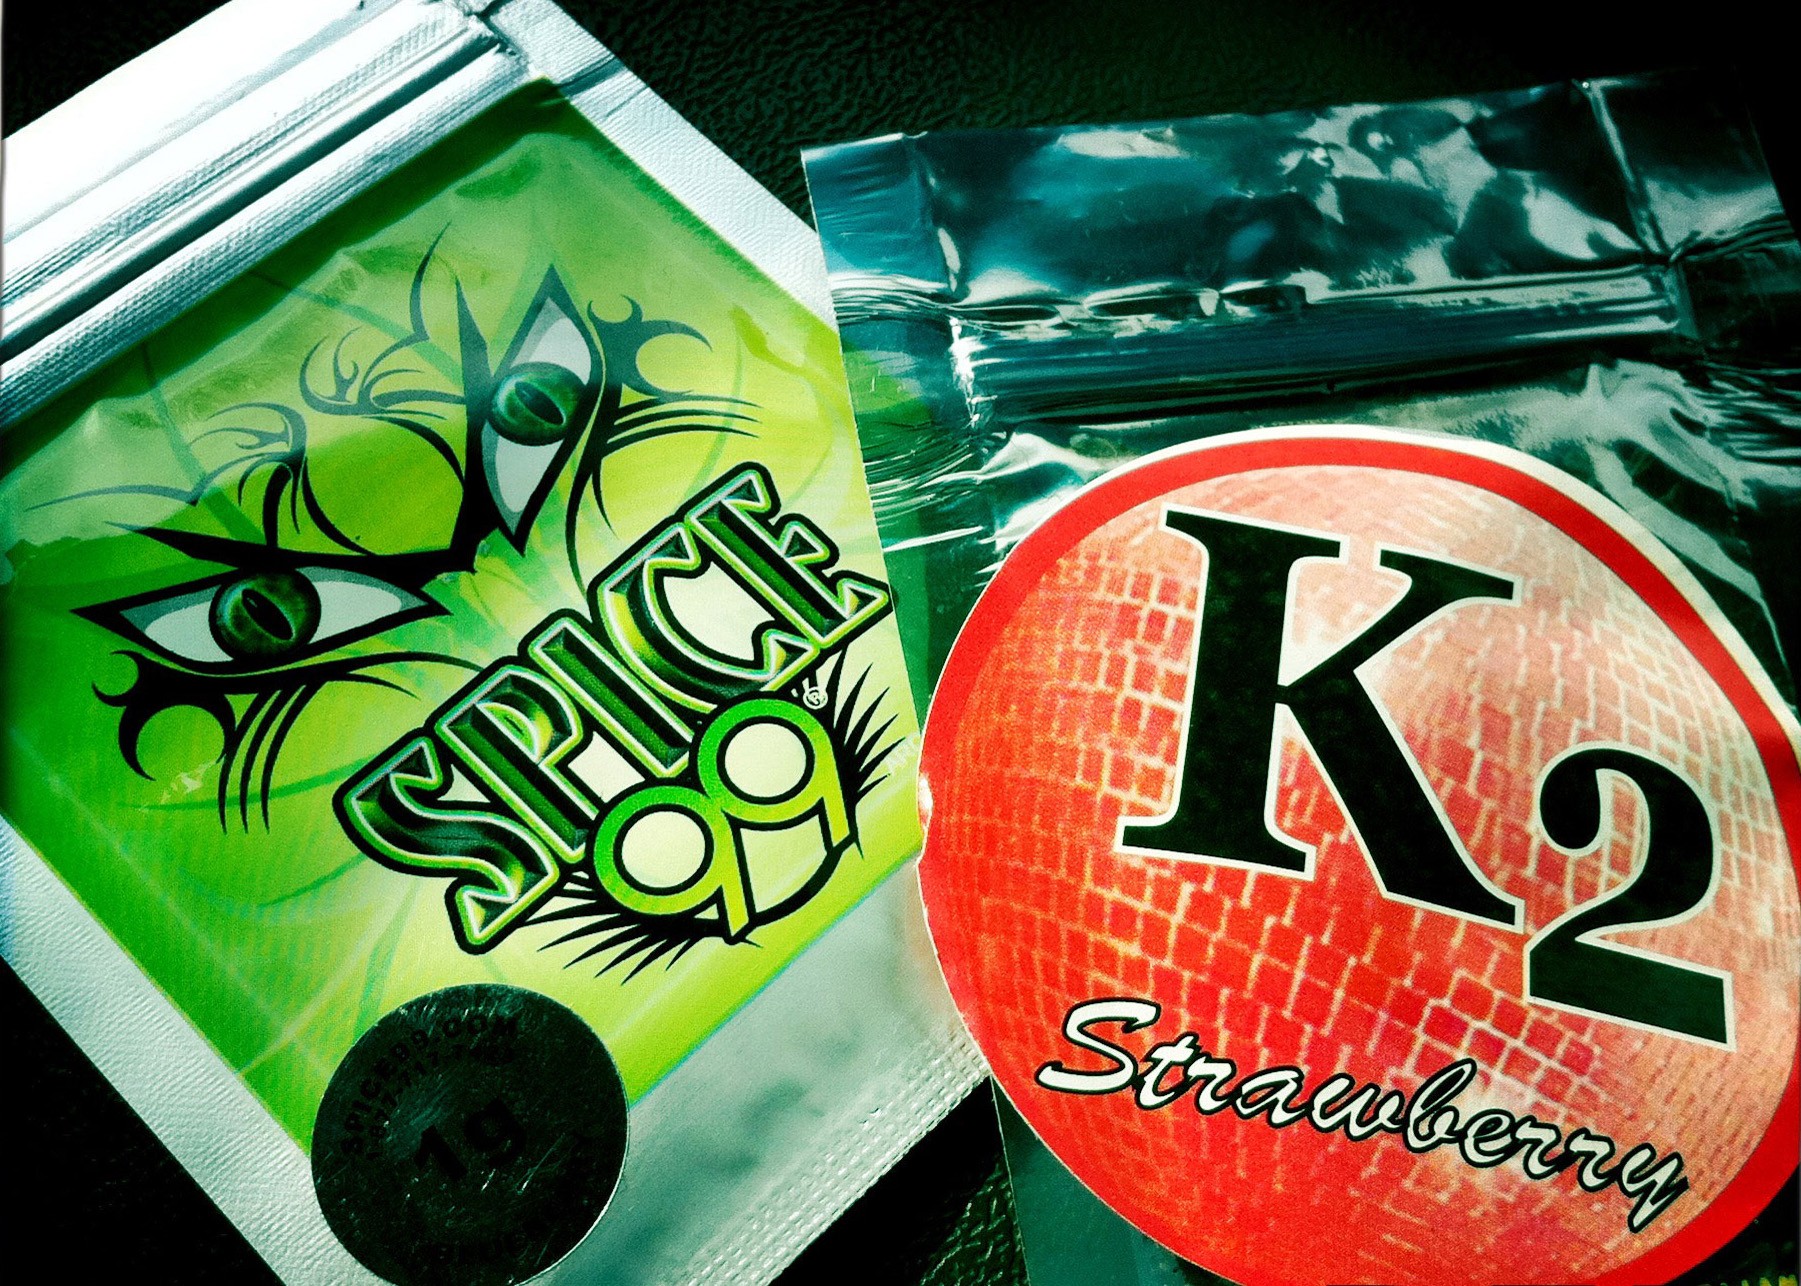 'K2' or 'Spice' is Used Significantly Less In States With Cannabis Legalization